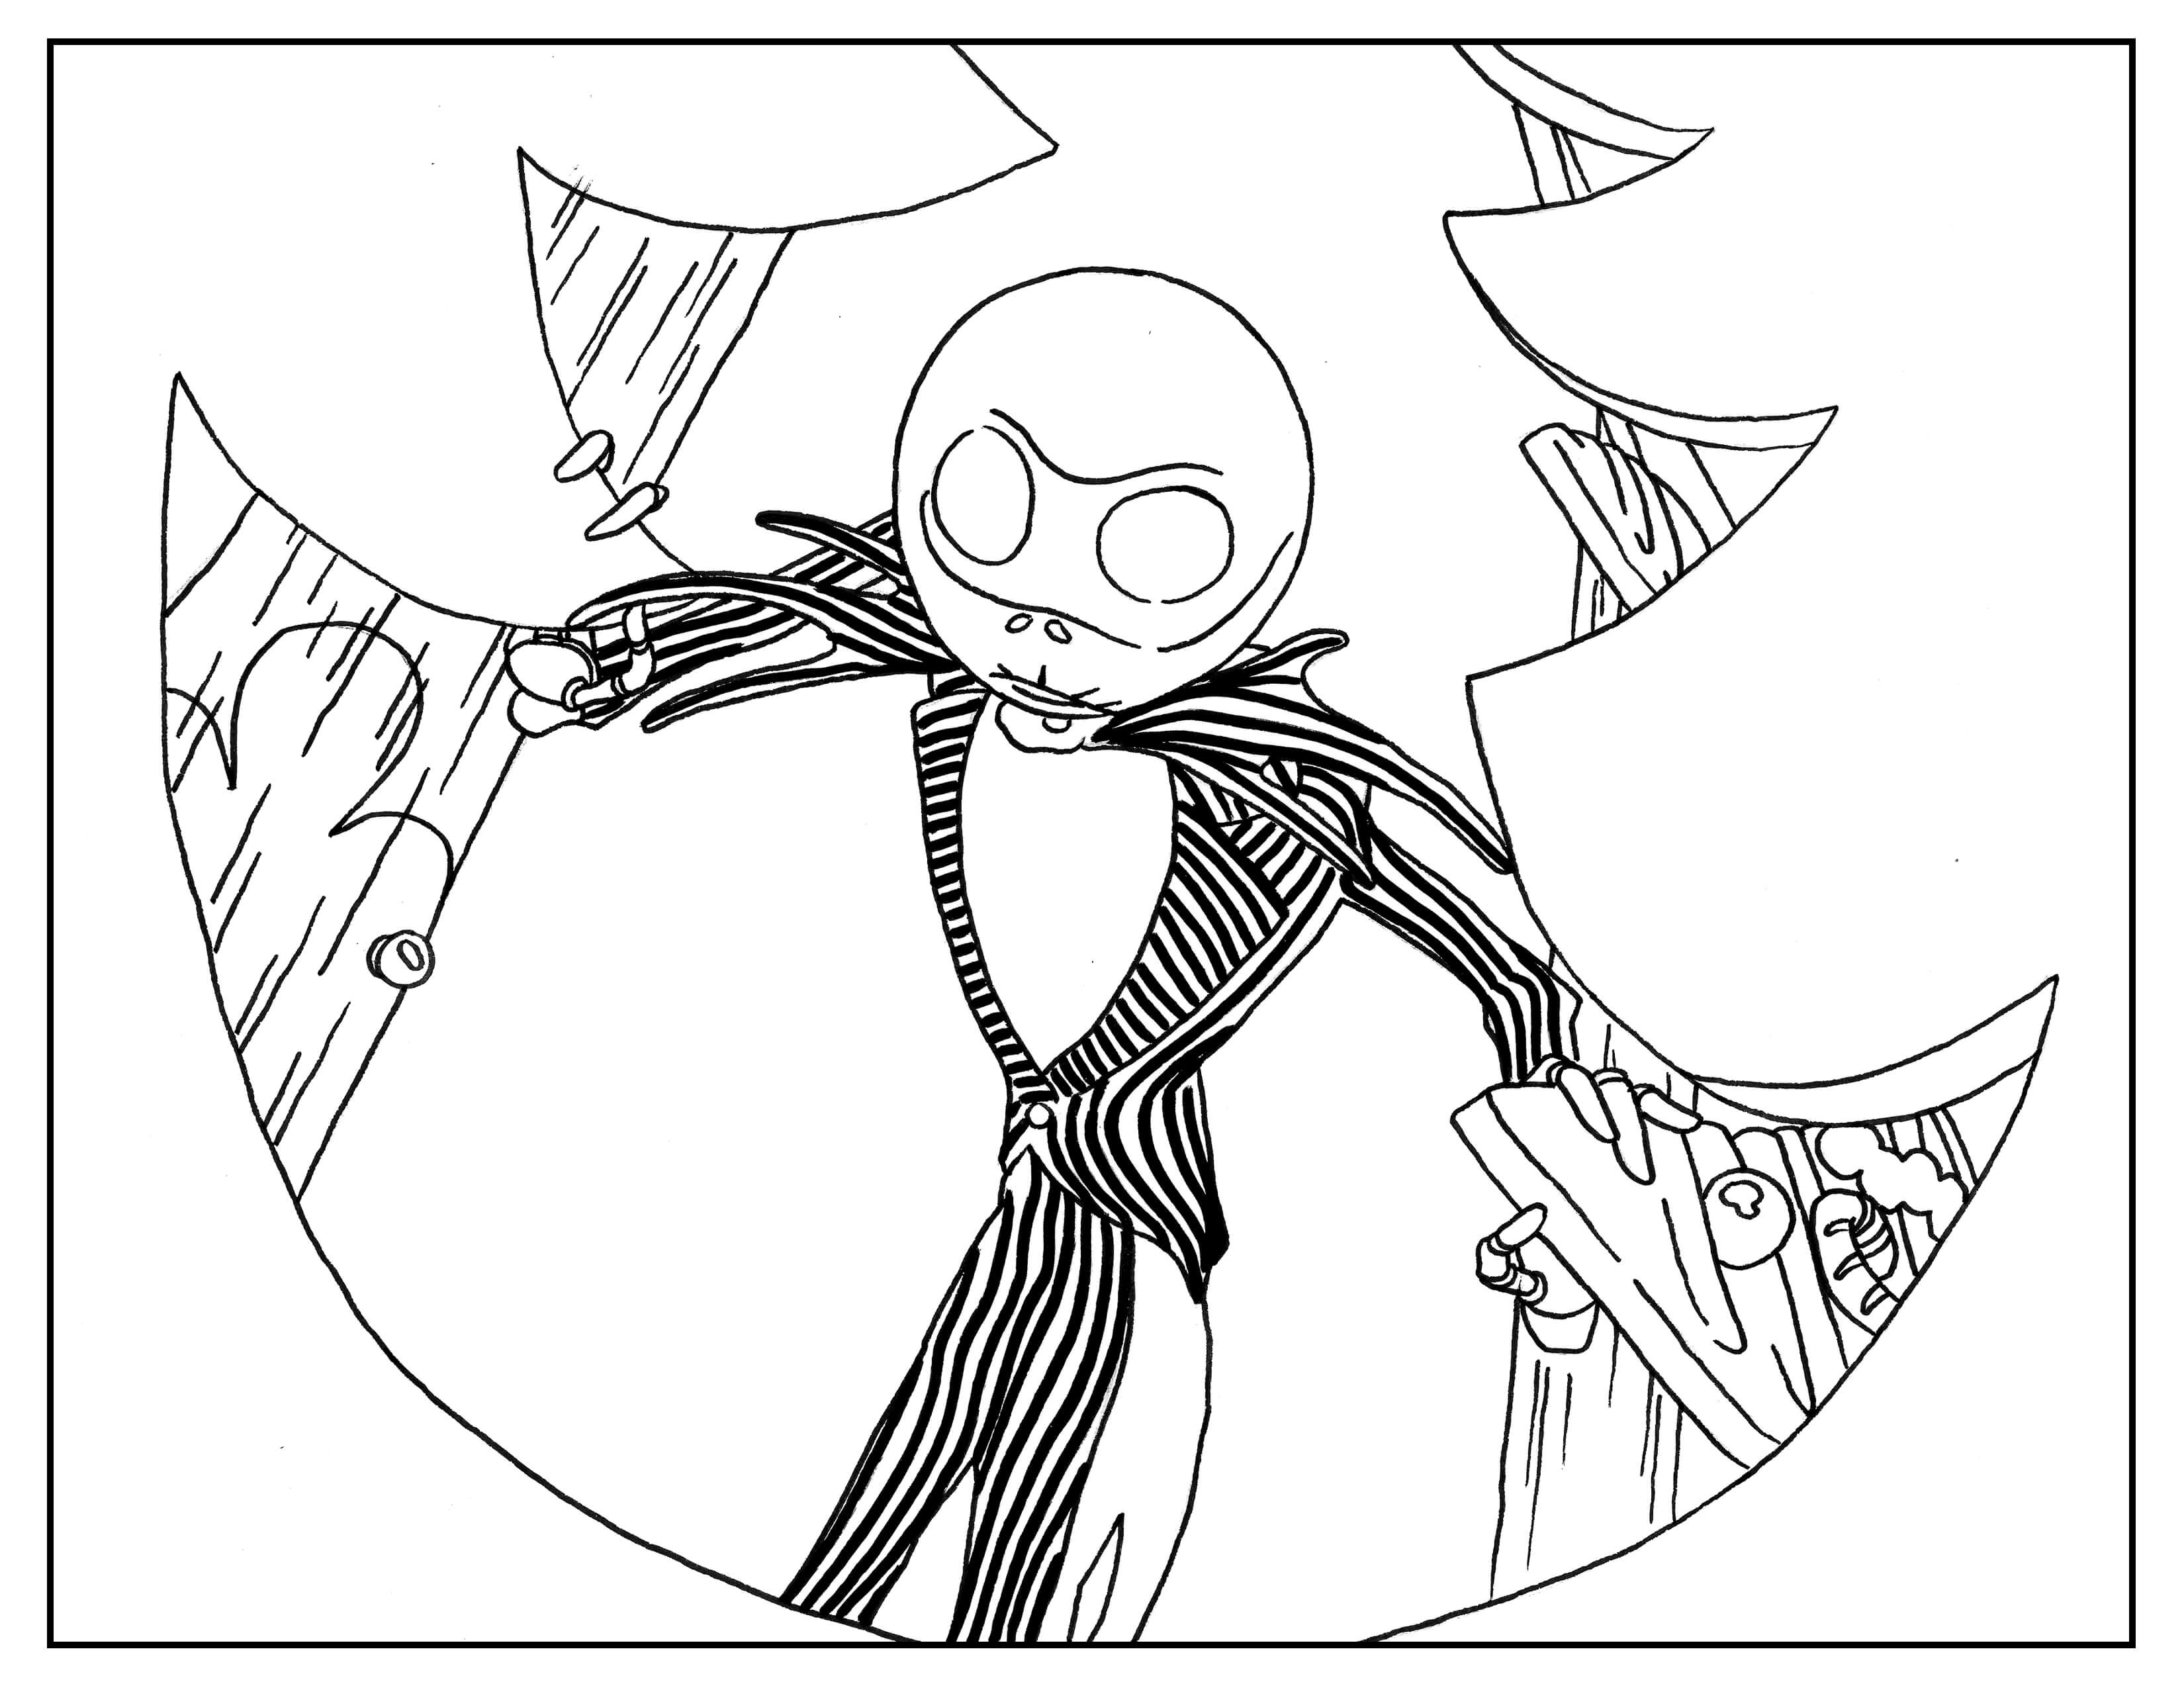 Coloring page inspired by Tim Burton's animation movie Nightmare before Christmas